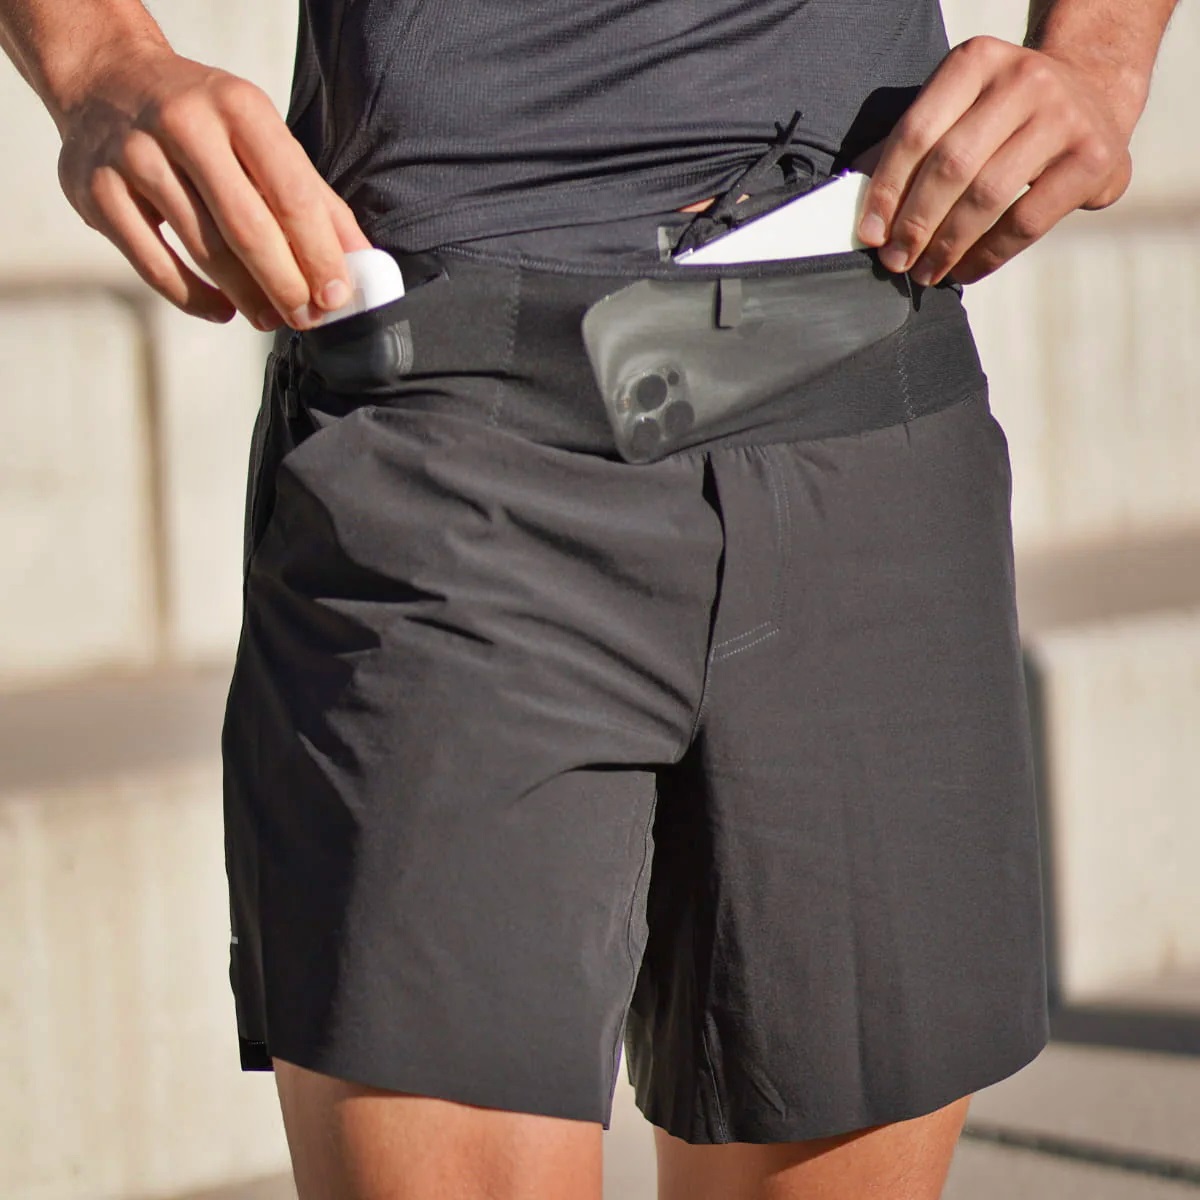 14 Unbelievable Men’s Jogging Shorts With Pockets For 2023